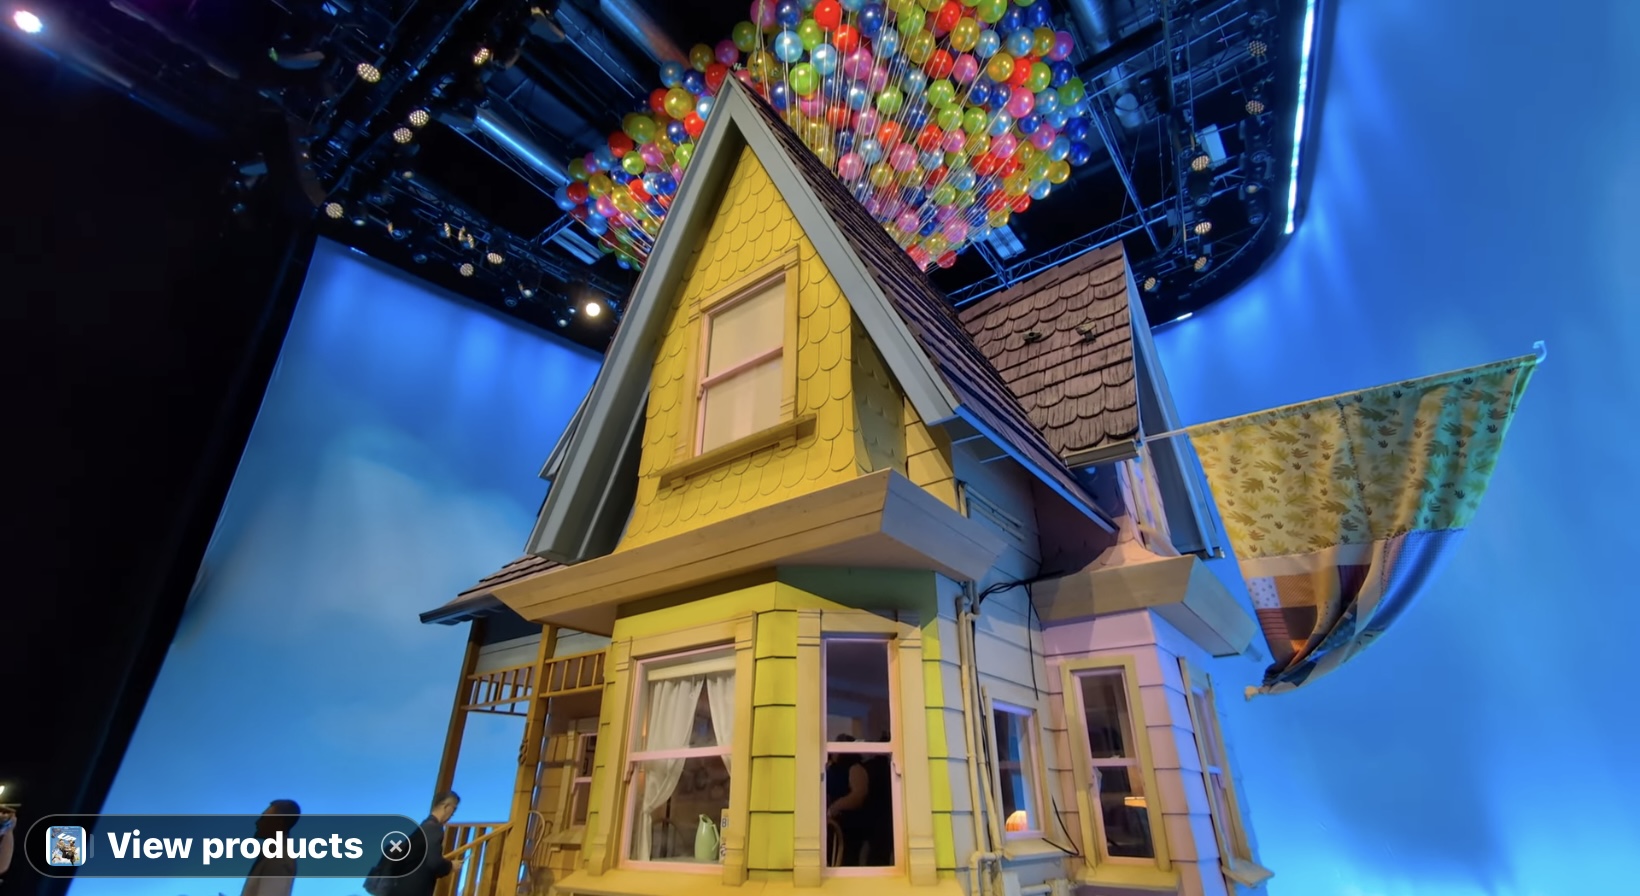 Airbnb Creates ‘Up’ House Replica